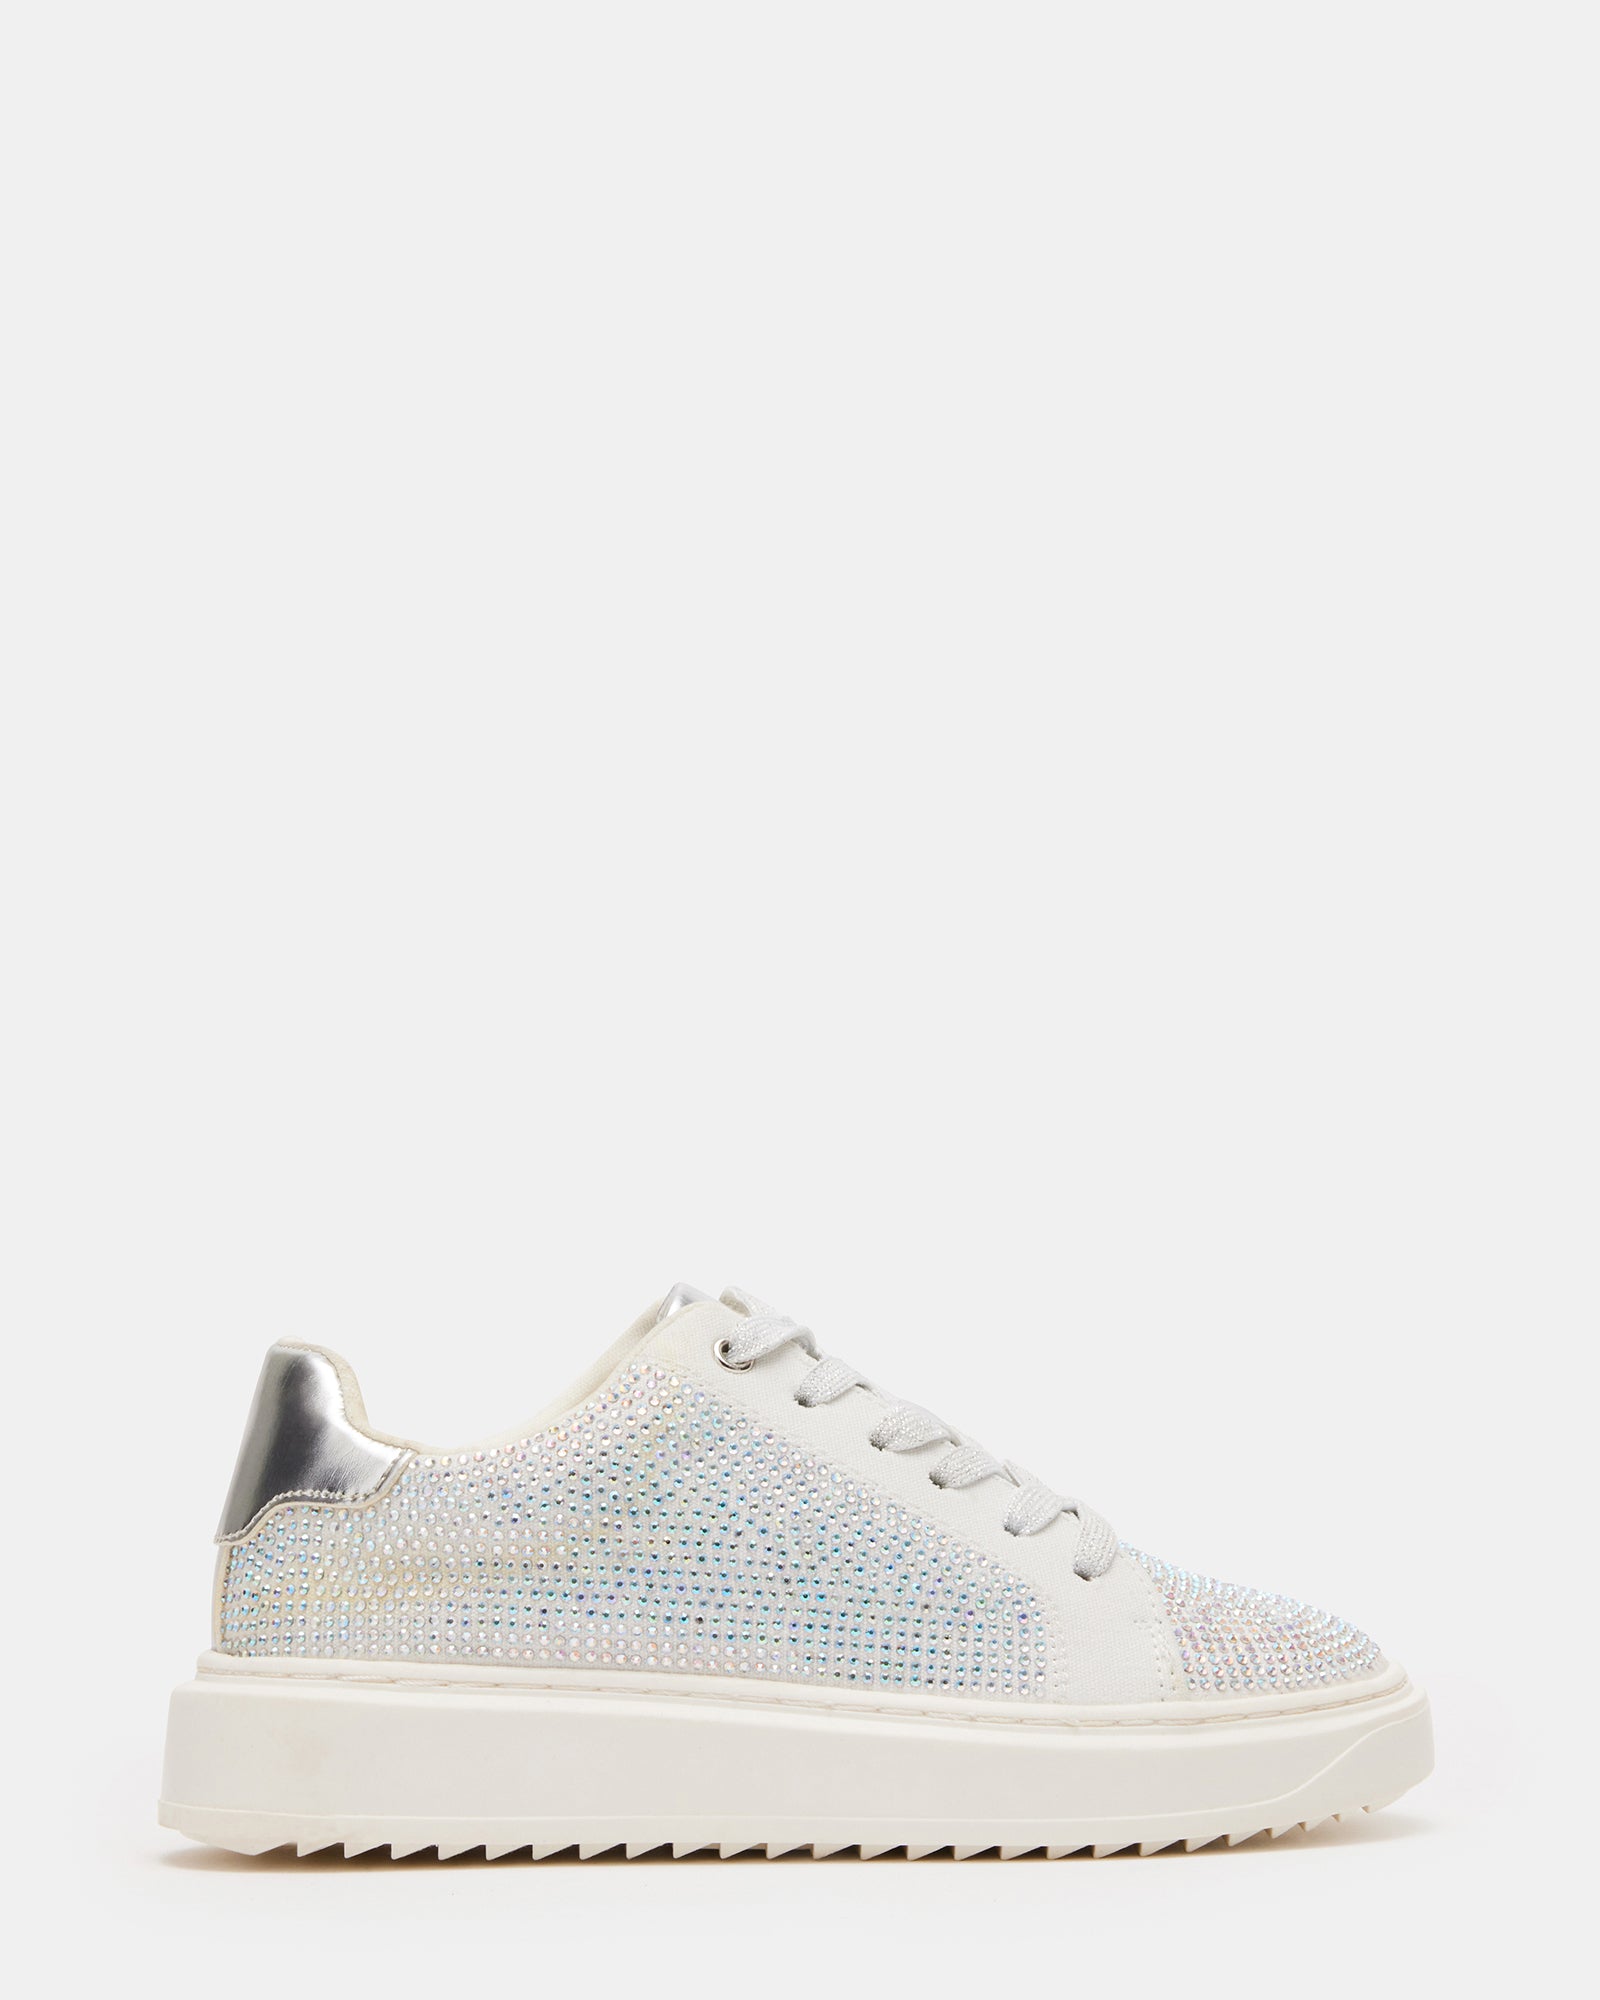 Kids' CHARLY Rhinestones | Girls' Low-Top Lace-Up Sneaker – Steve Madden